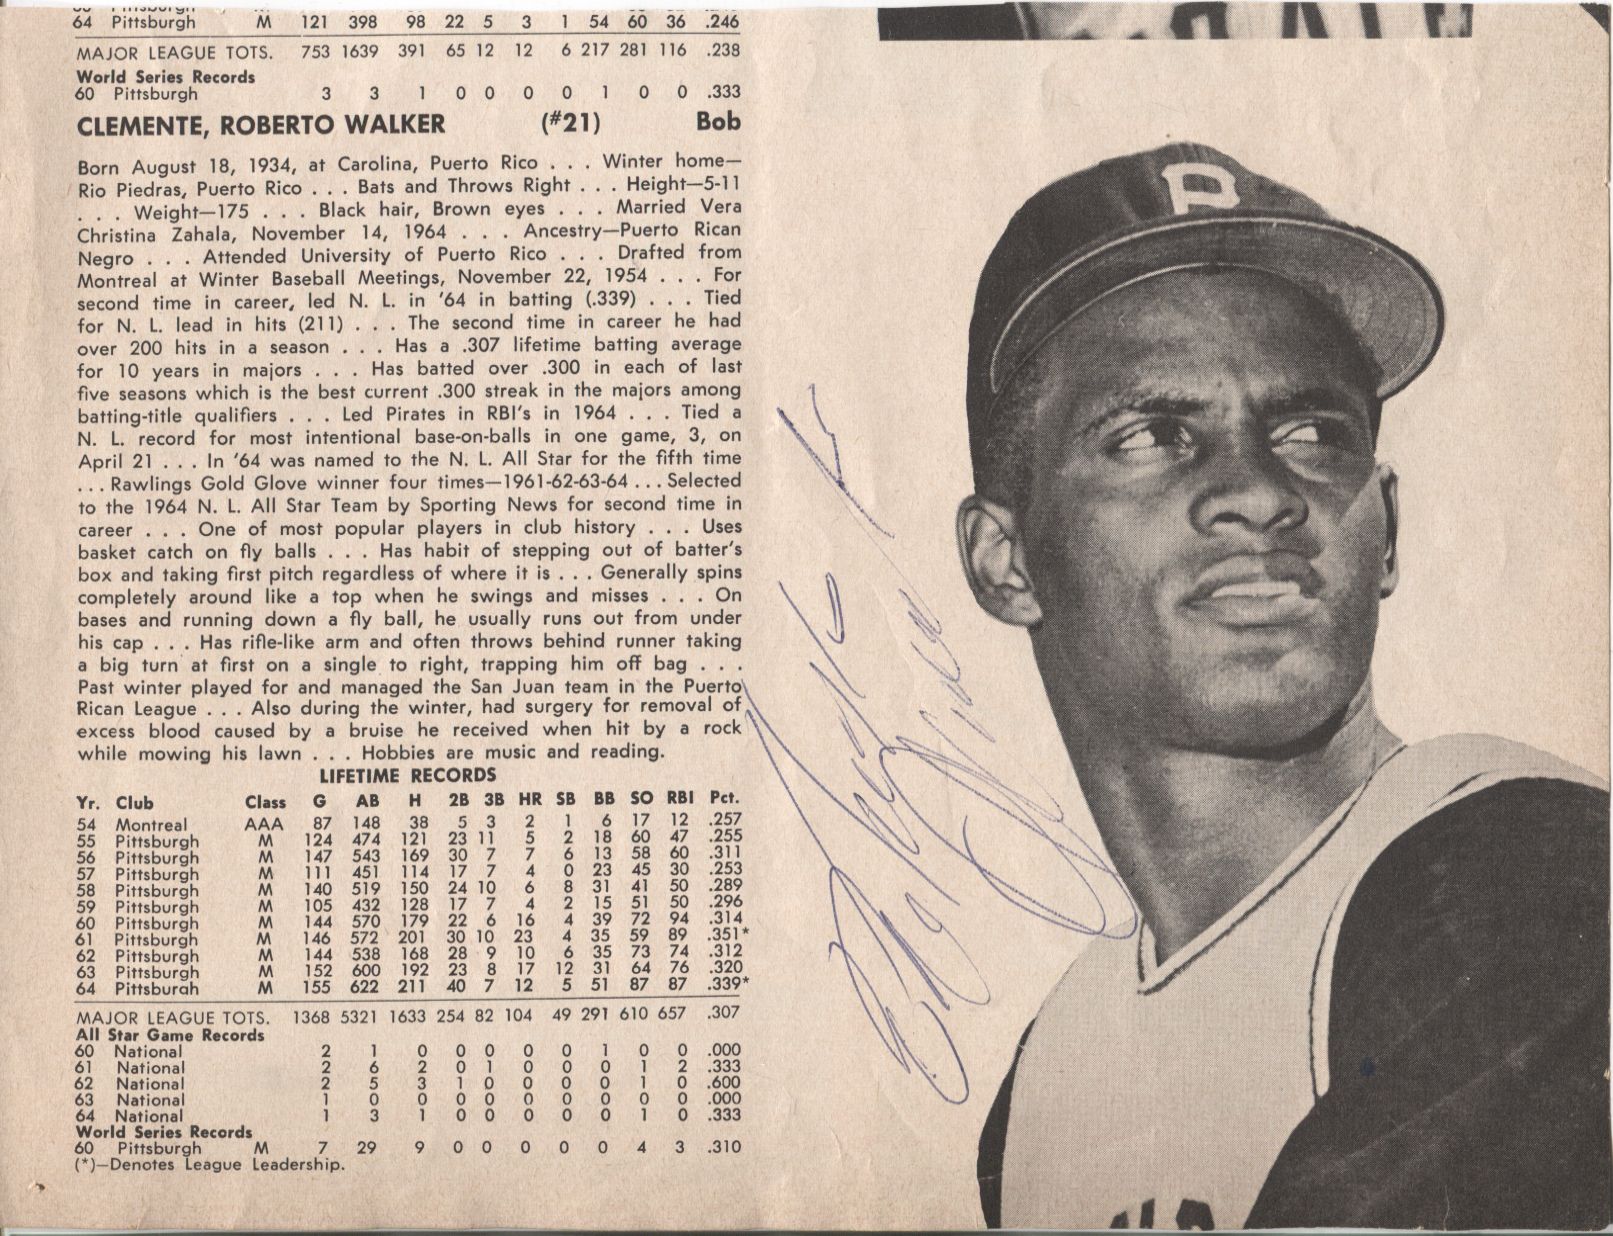 Roberto Clemente Signed Photograph